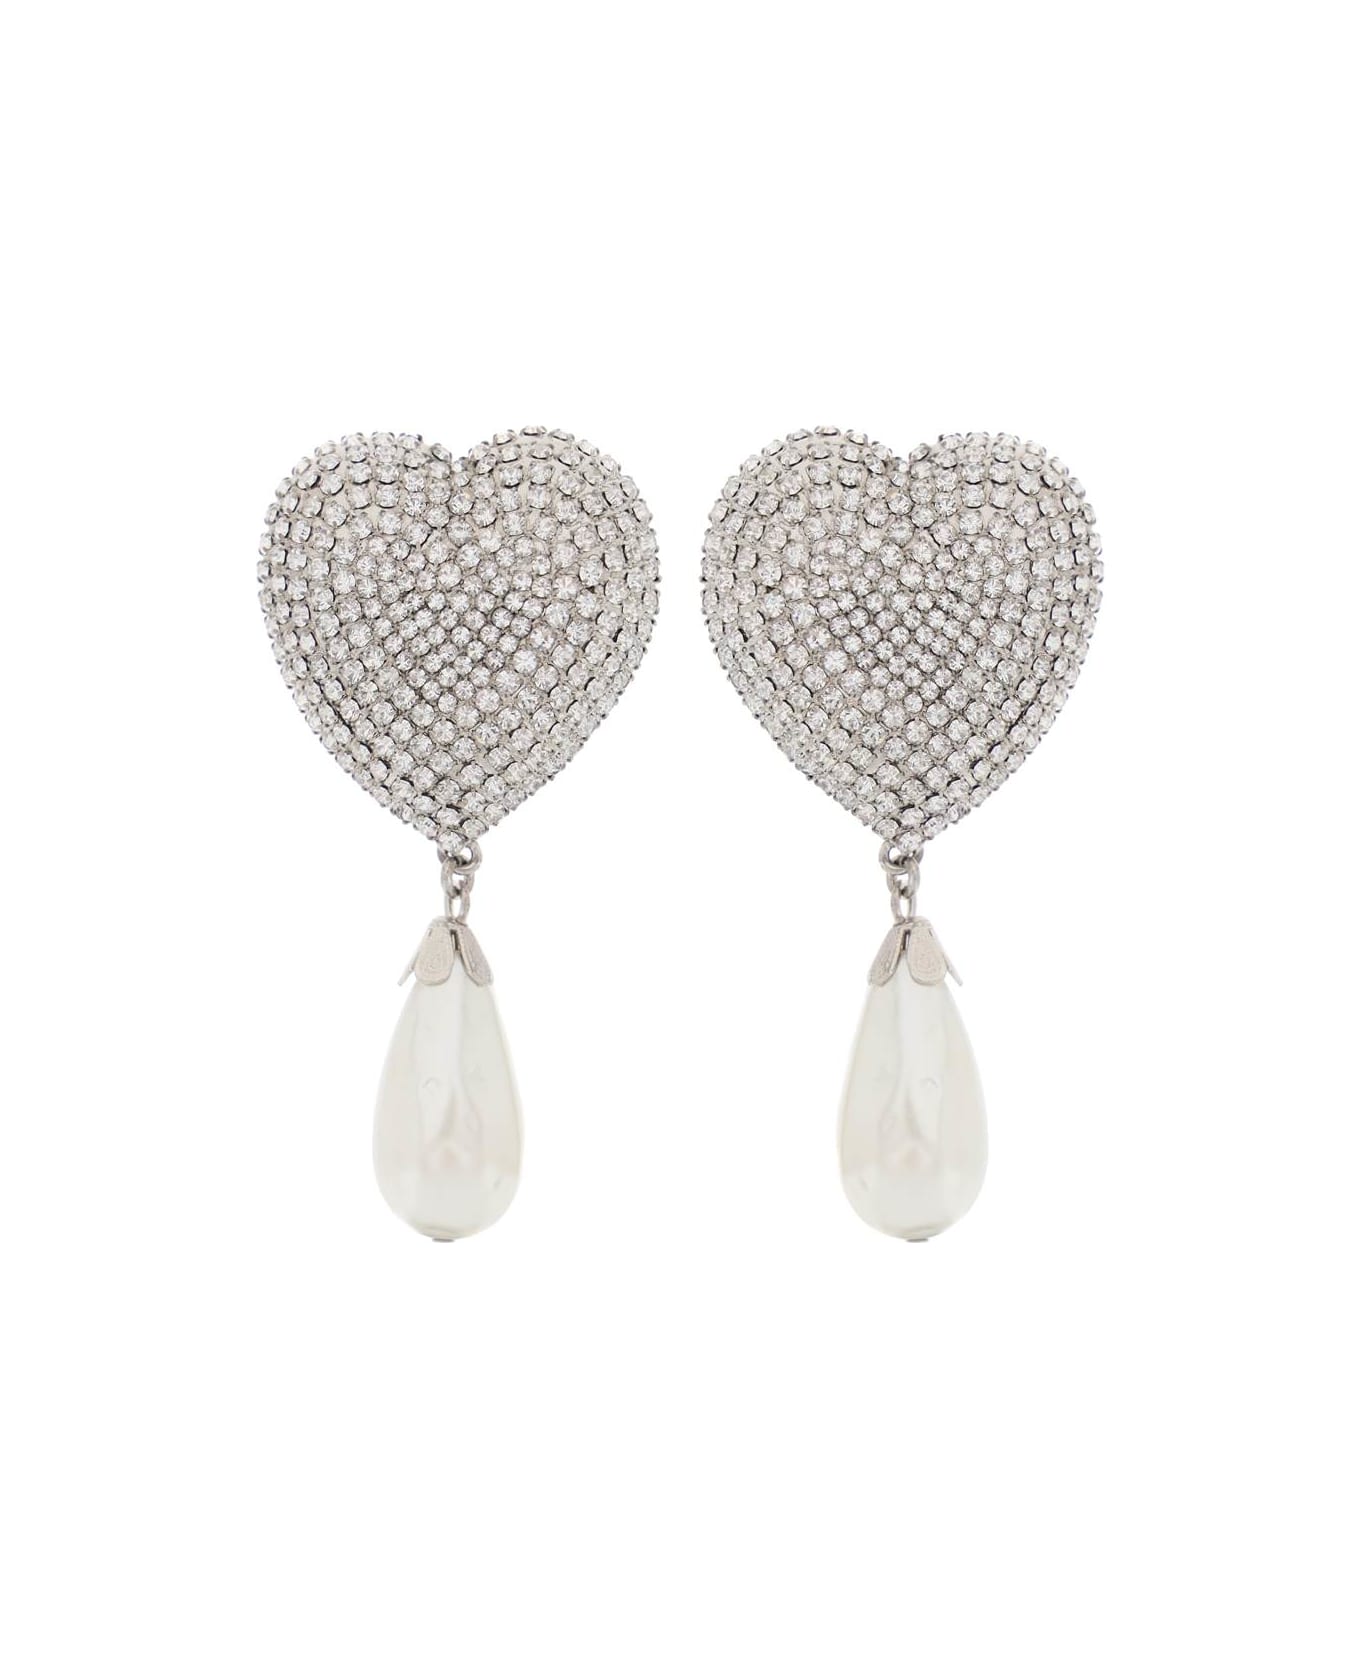 Alessandra Rich Heart Crystals And Pearl Earrings - Cry-silver